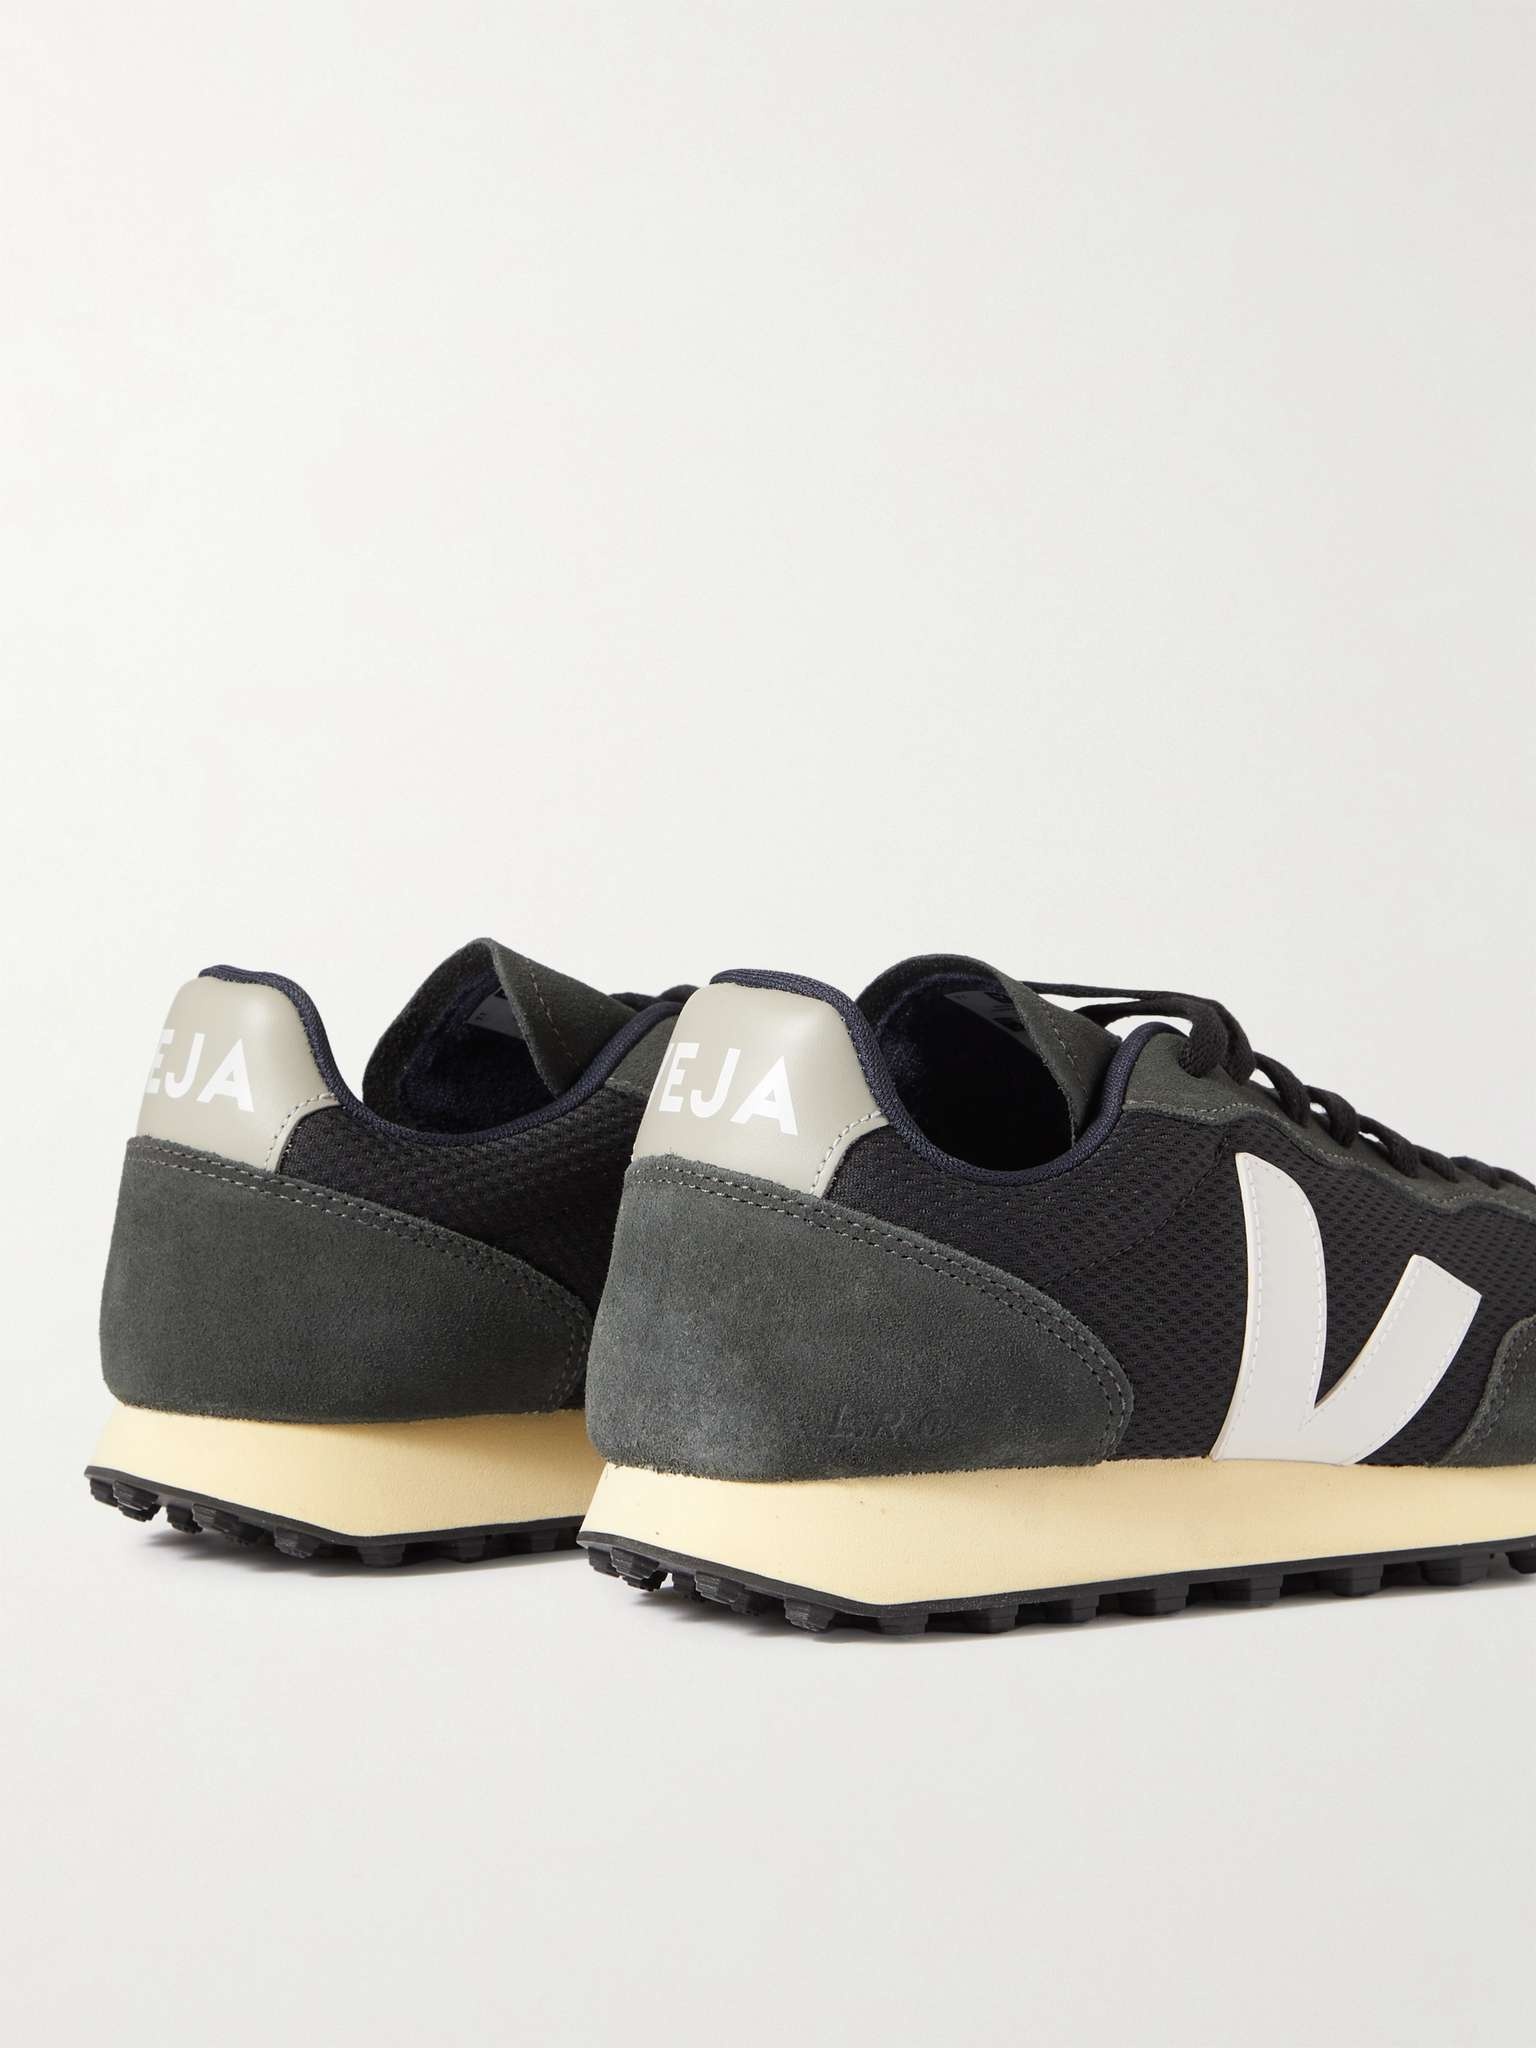 Rio Branco Leather-Trimmed Alveomesh and Suede Sneakers - 5